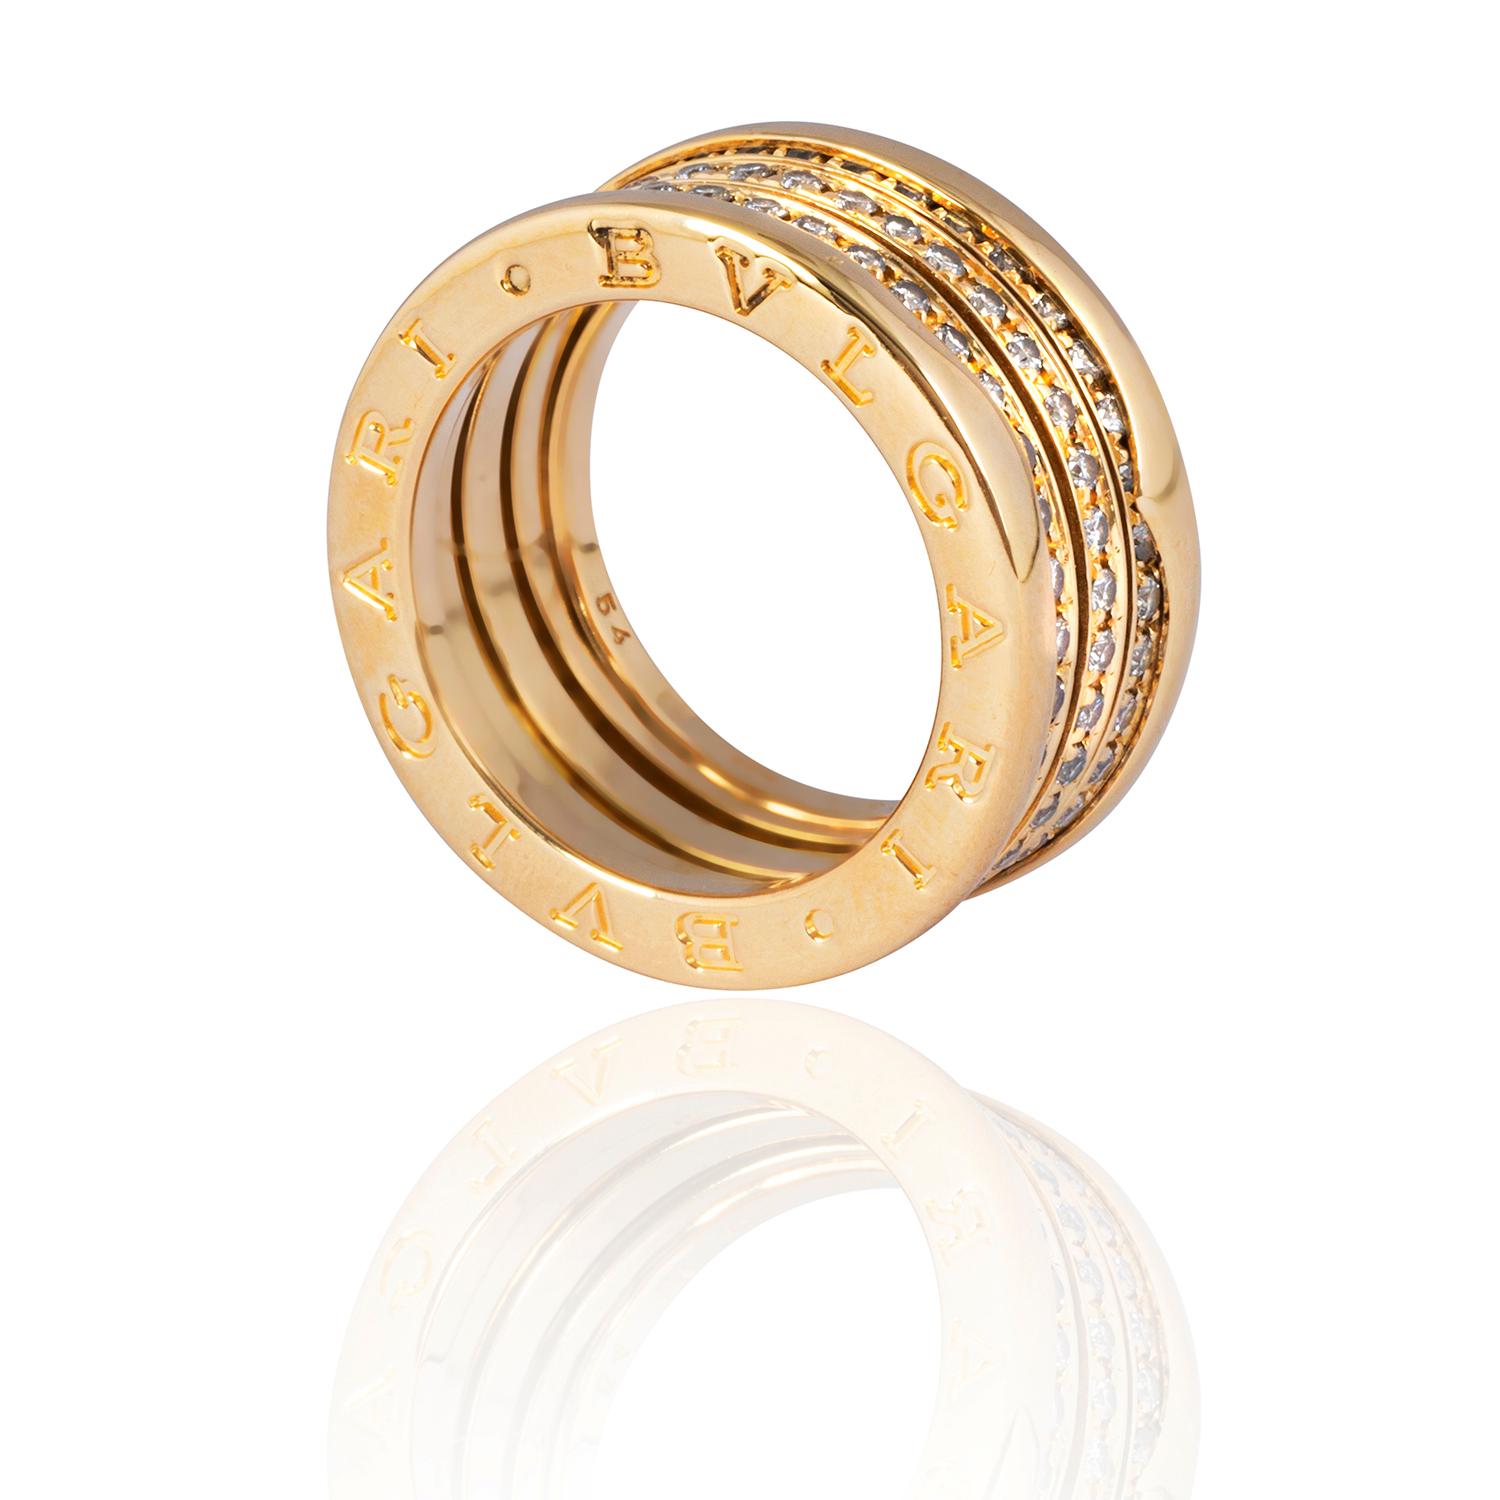 This iconic Bulgari statement ring features multiple sprung bands, set all the way round with glittering round brilliant cut diamonds.  With three central stone-set bands bordered by two polished gold bands, this is a broad ring measuring approx.